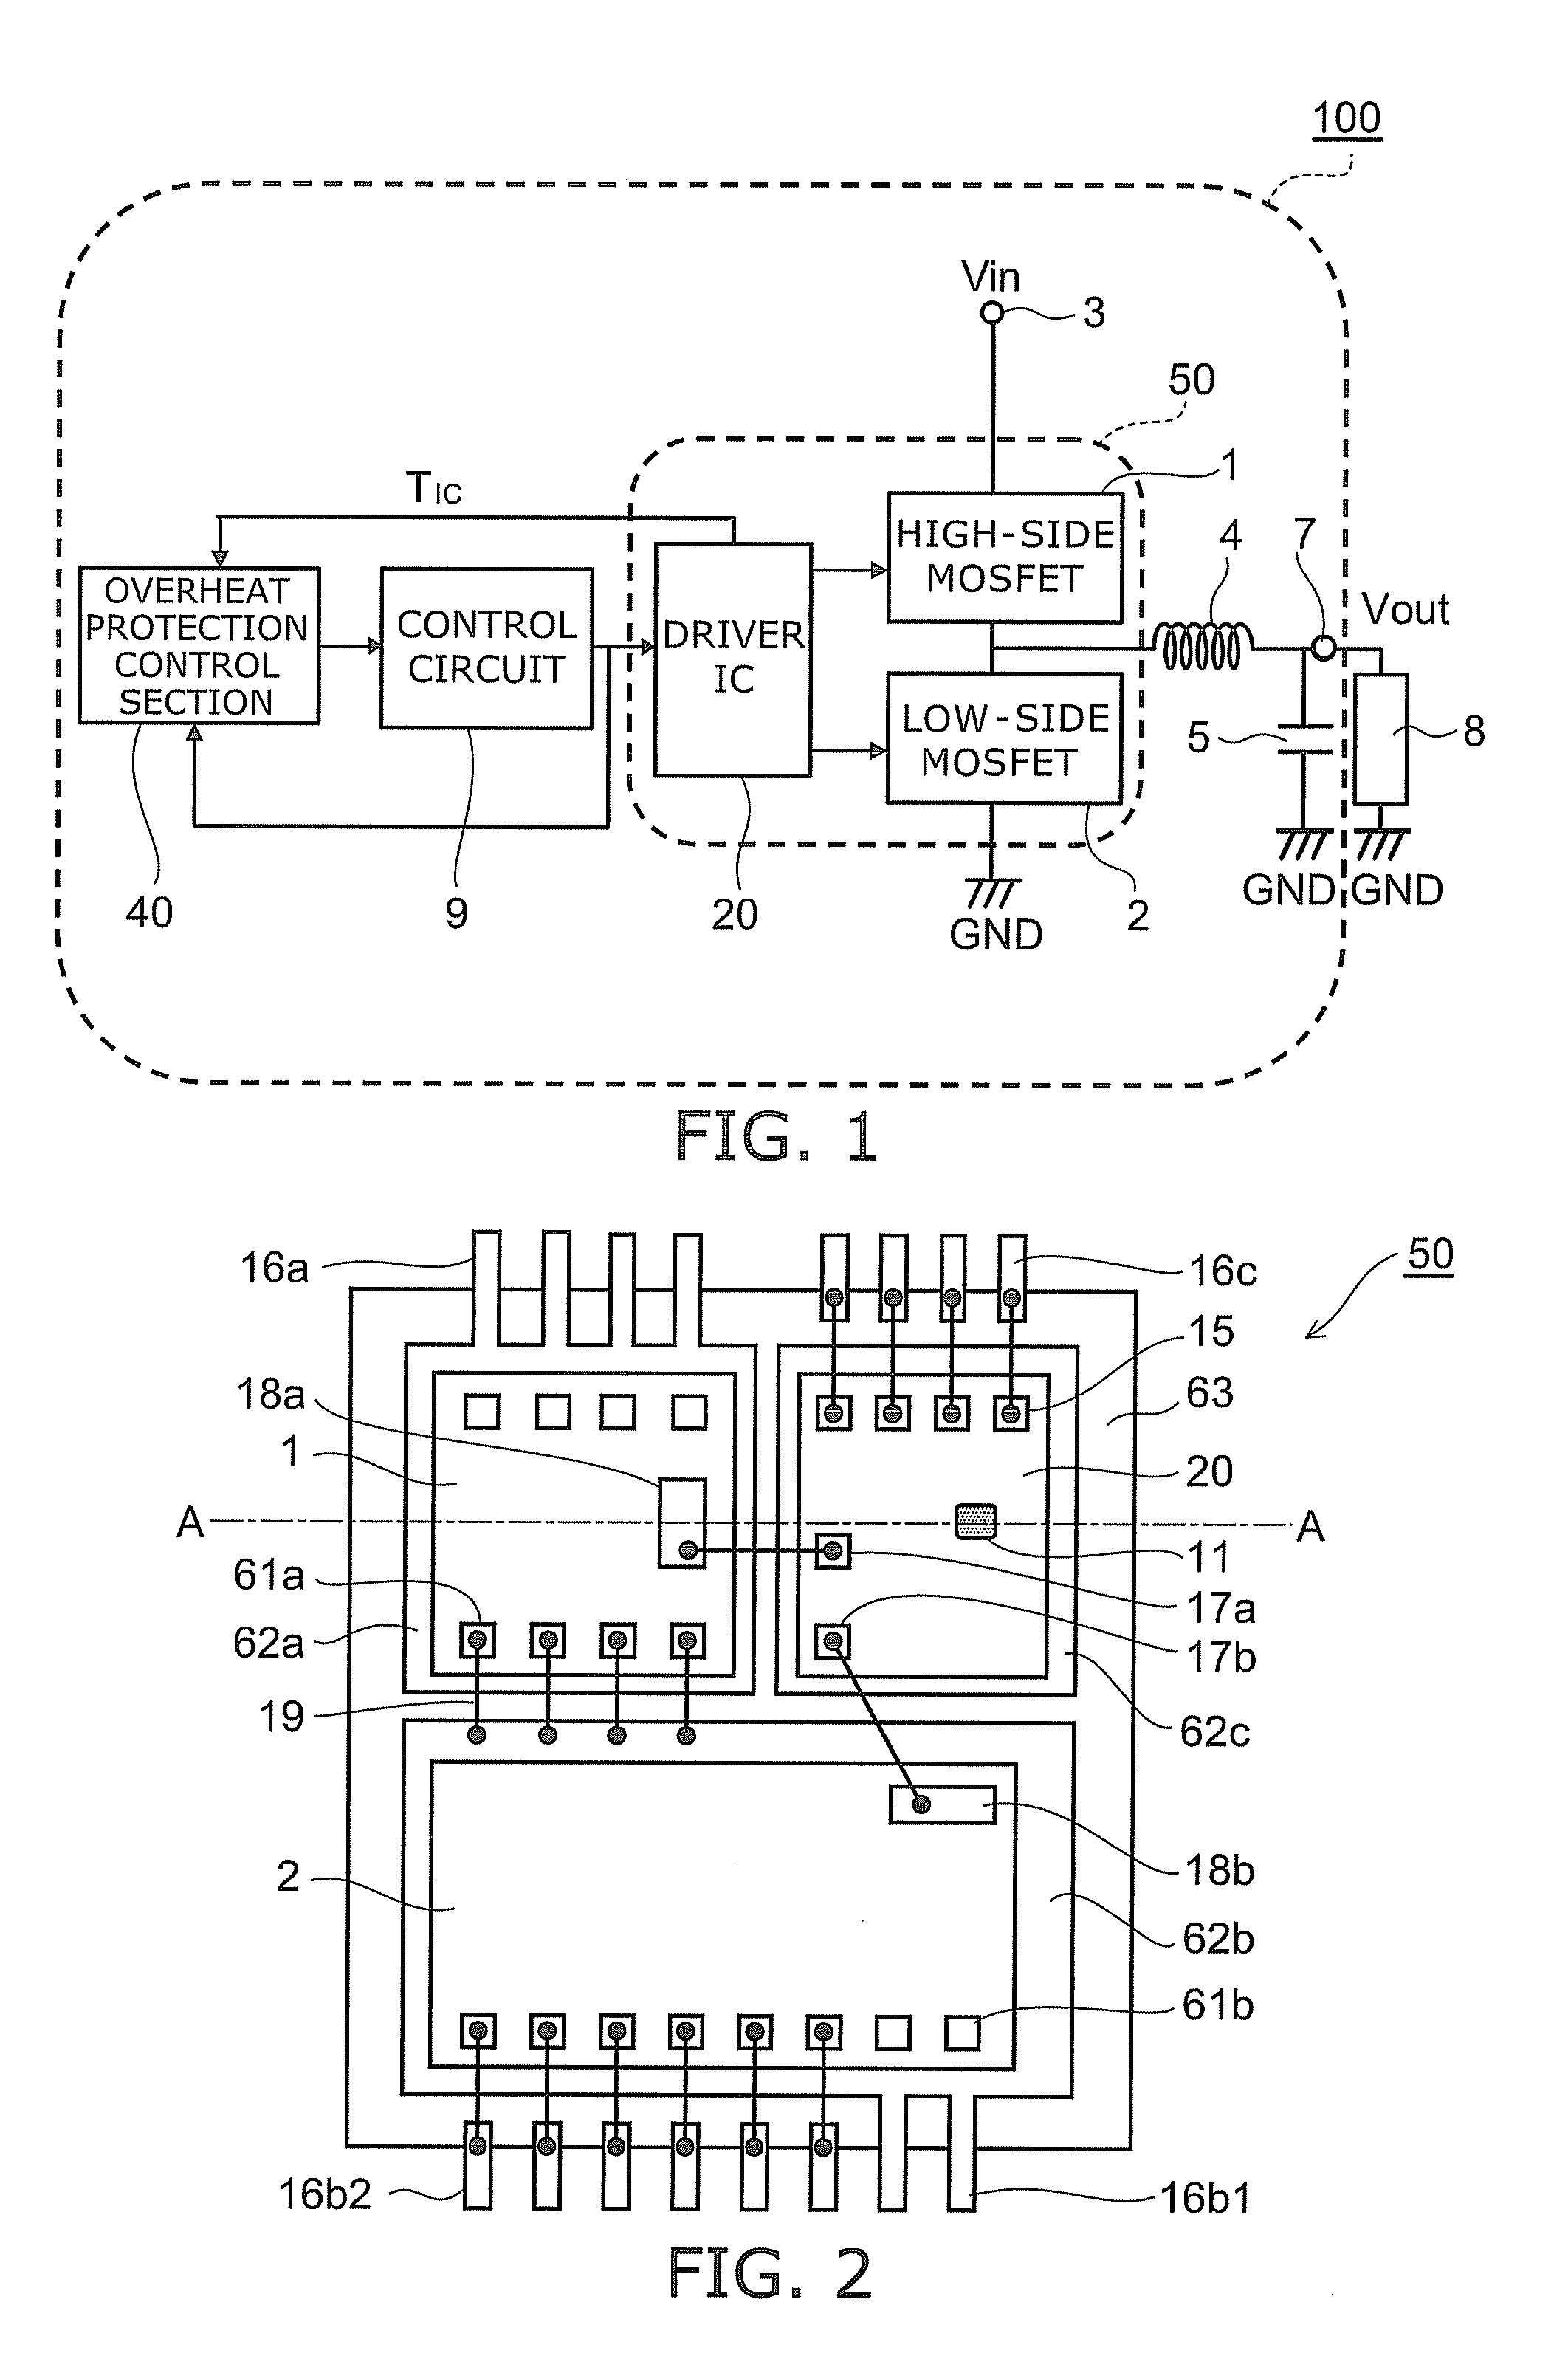 Power semiconductor system